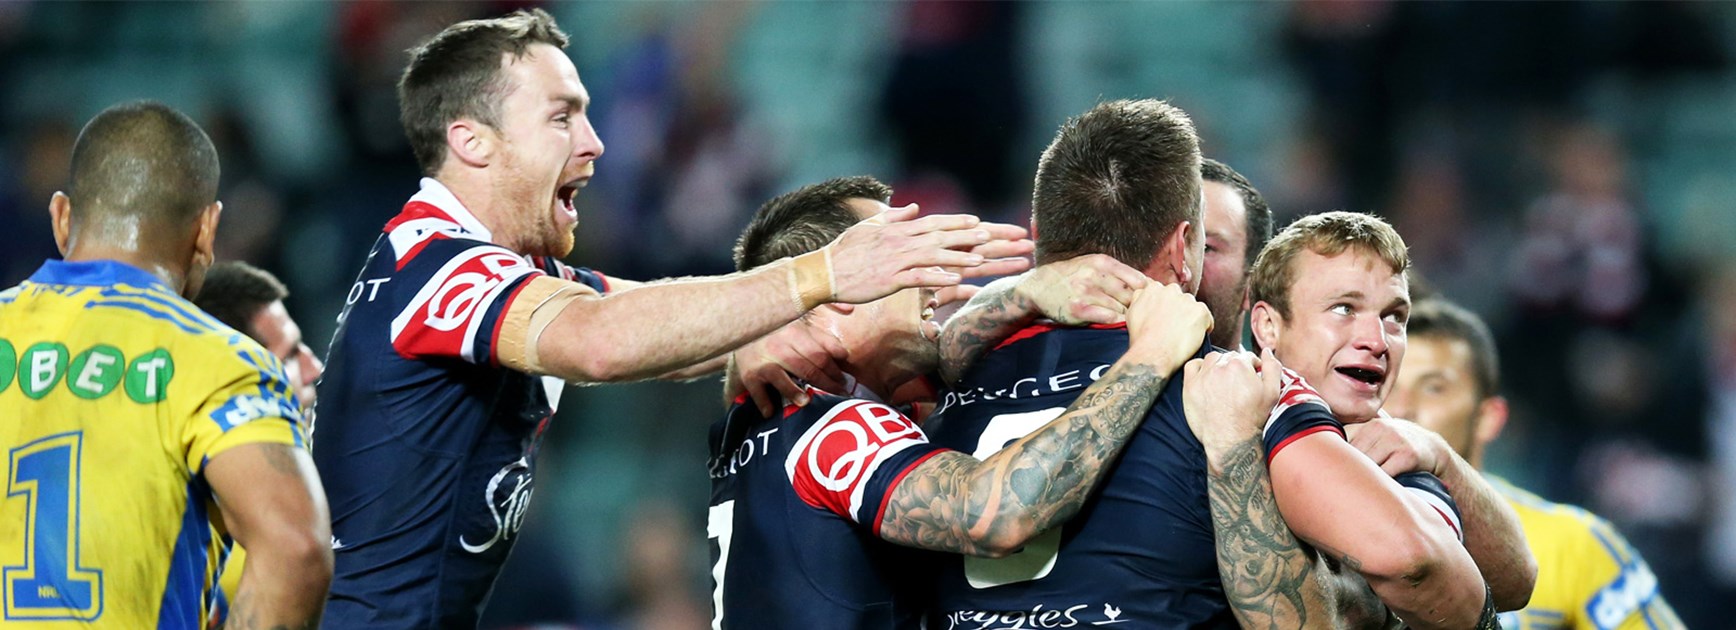 The Sydney Roosters avoided a shock defeat against Parramatta on Saturday night.